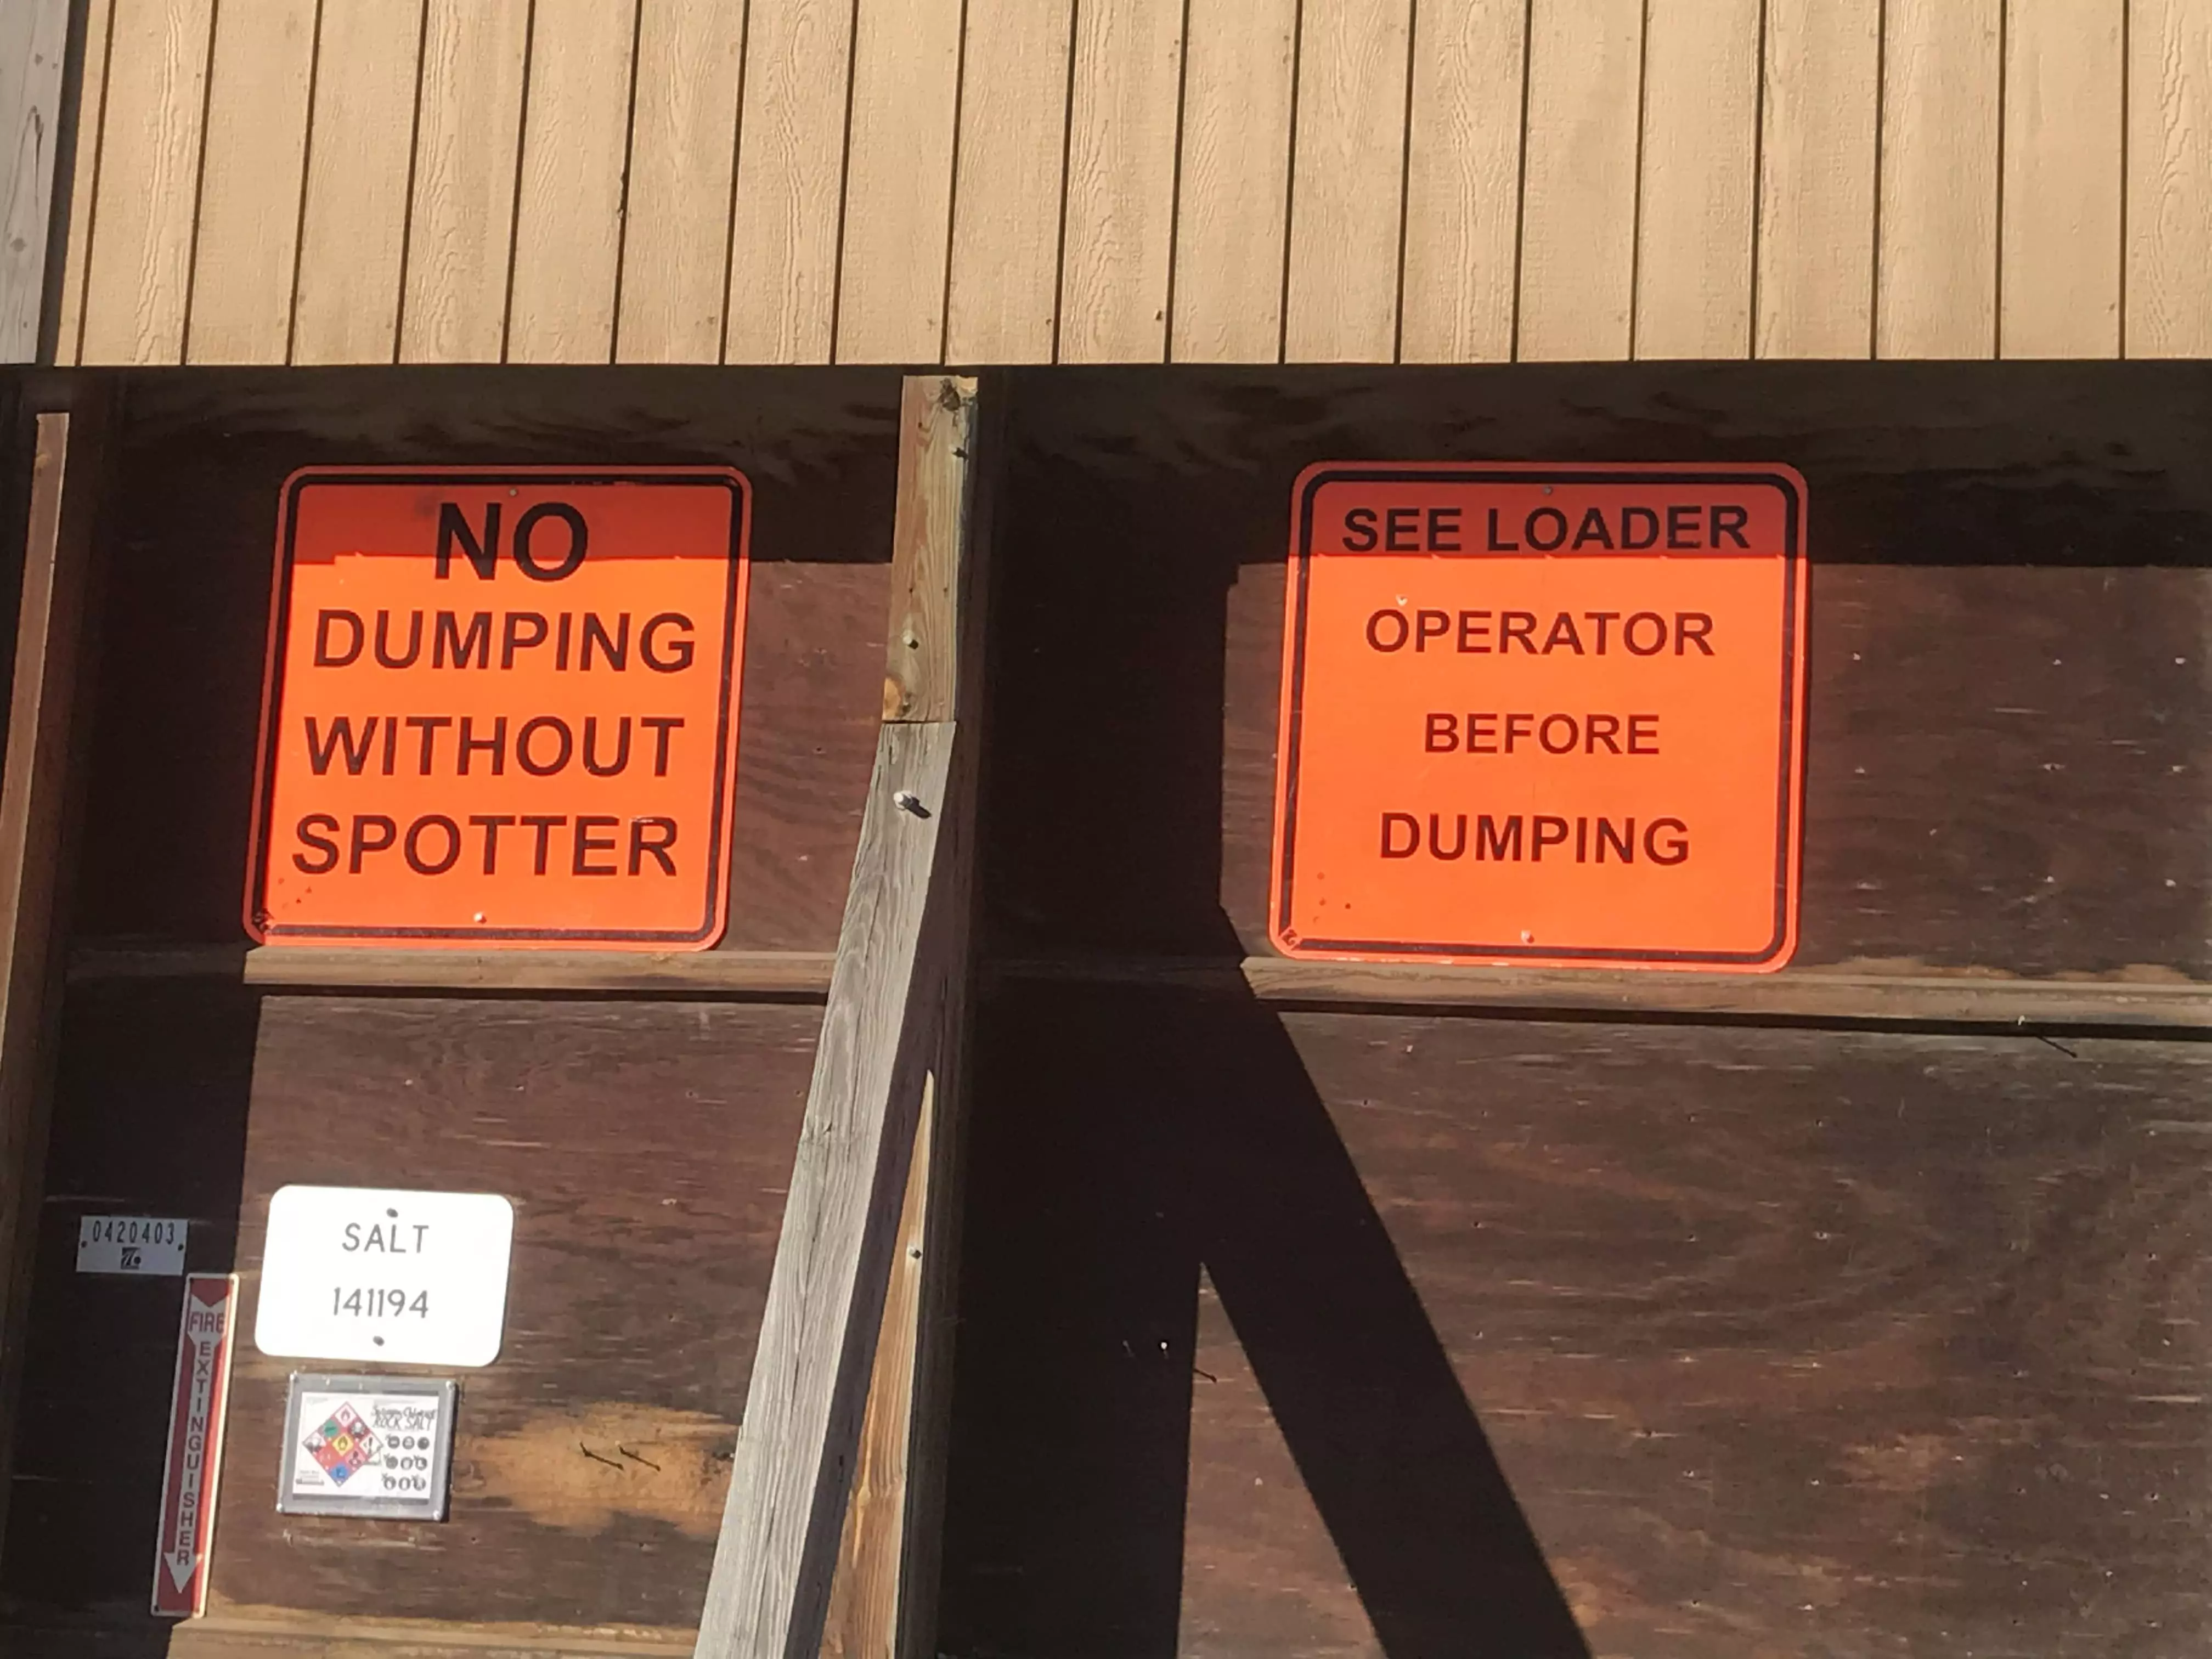 A PennDOT stockpile wall displays signs, including 'No dumping without spotter' and 'See loader operator before dumping.'